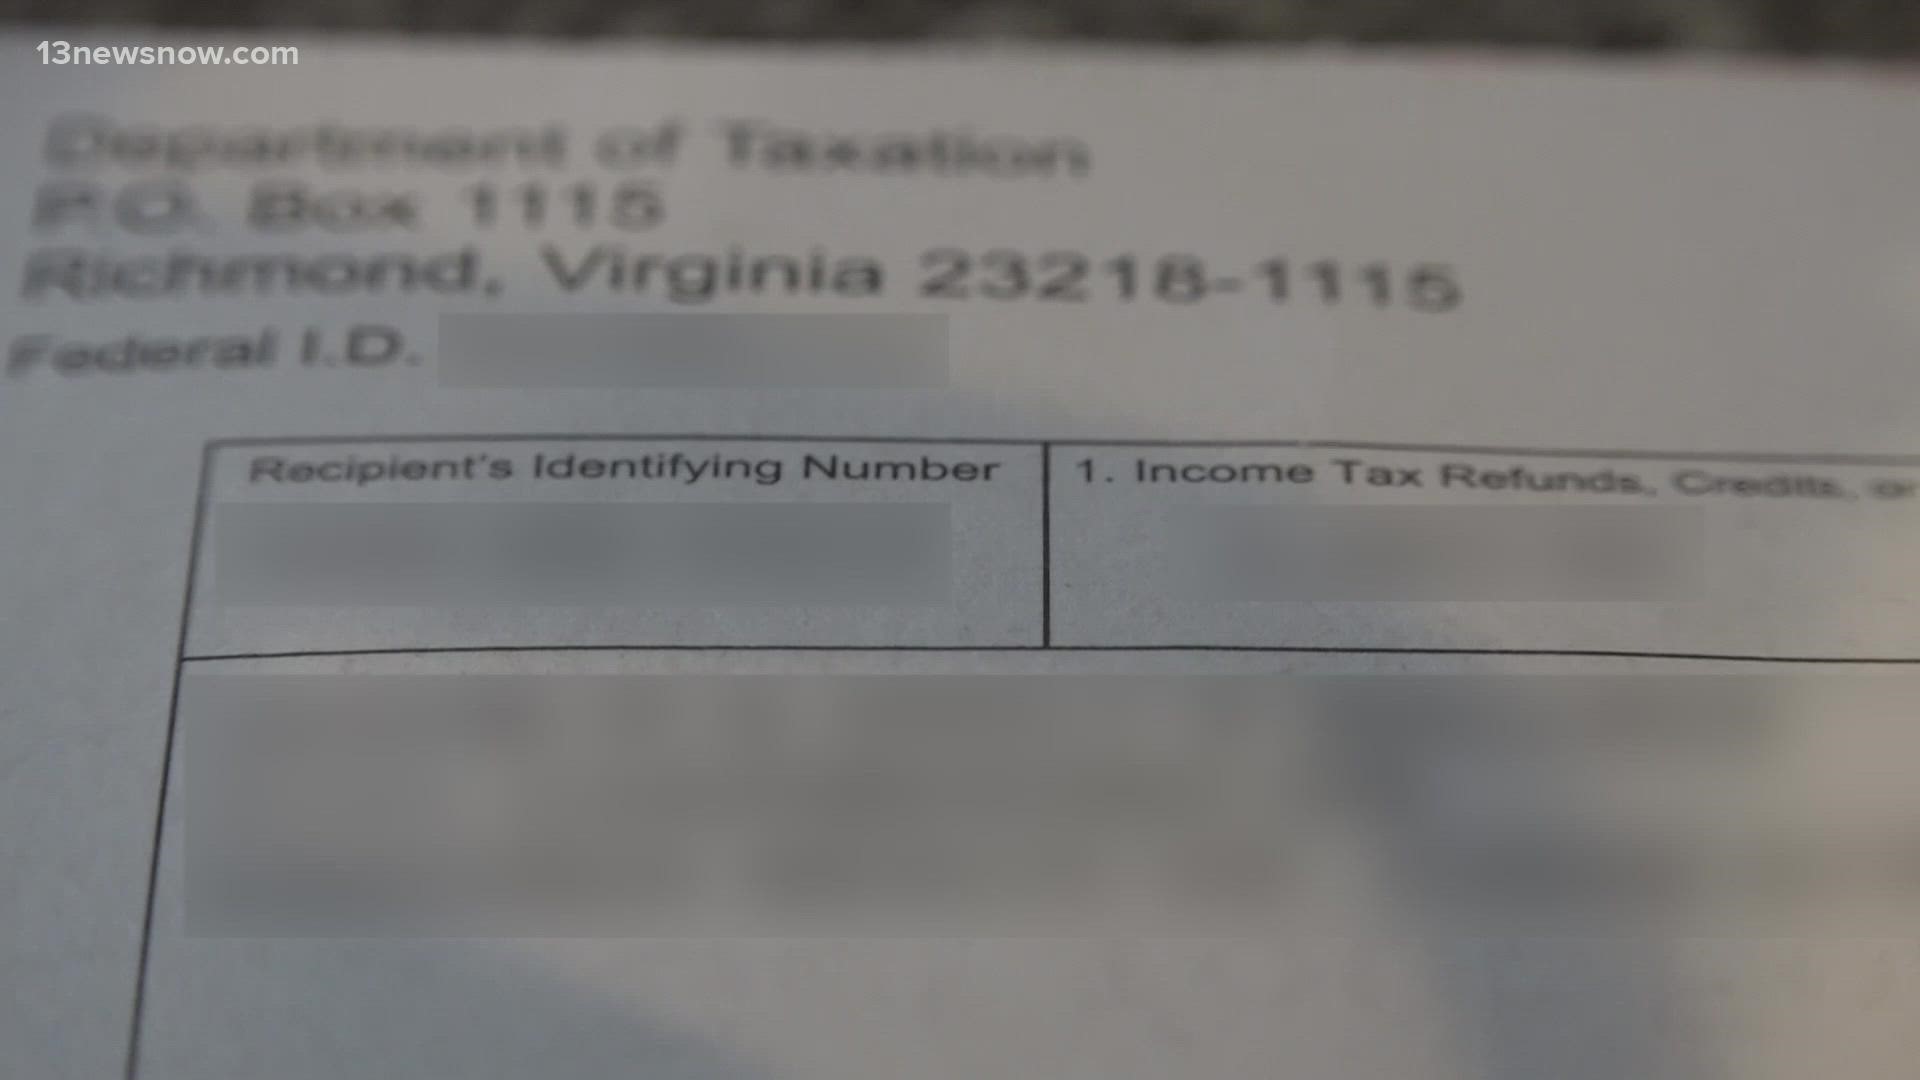 The Virginia Department of Taxation says up to 15,000 taxpayers, mostly in the Virginia Beach area, received tax documents with someone else's information.